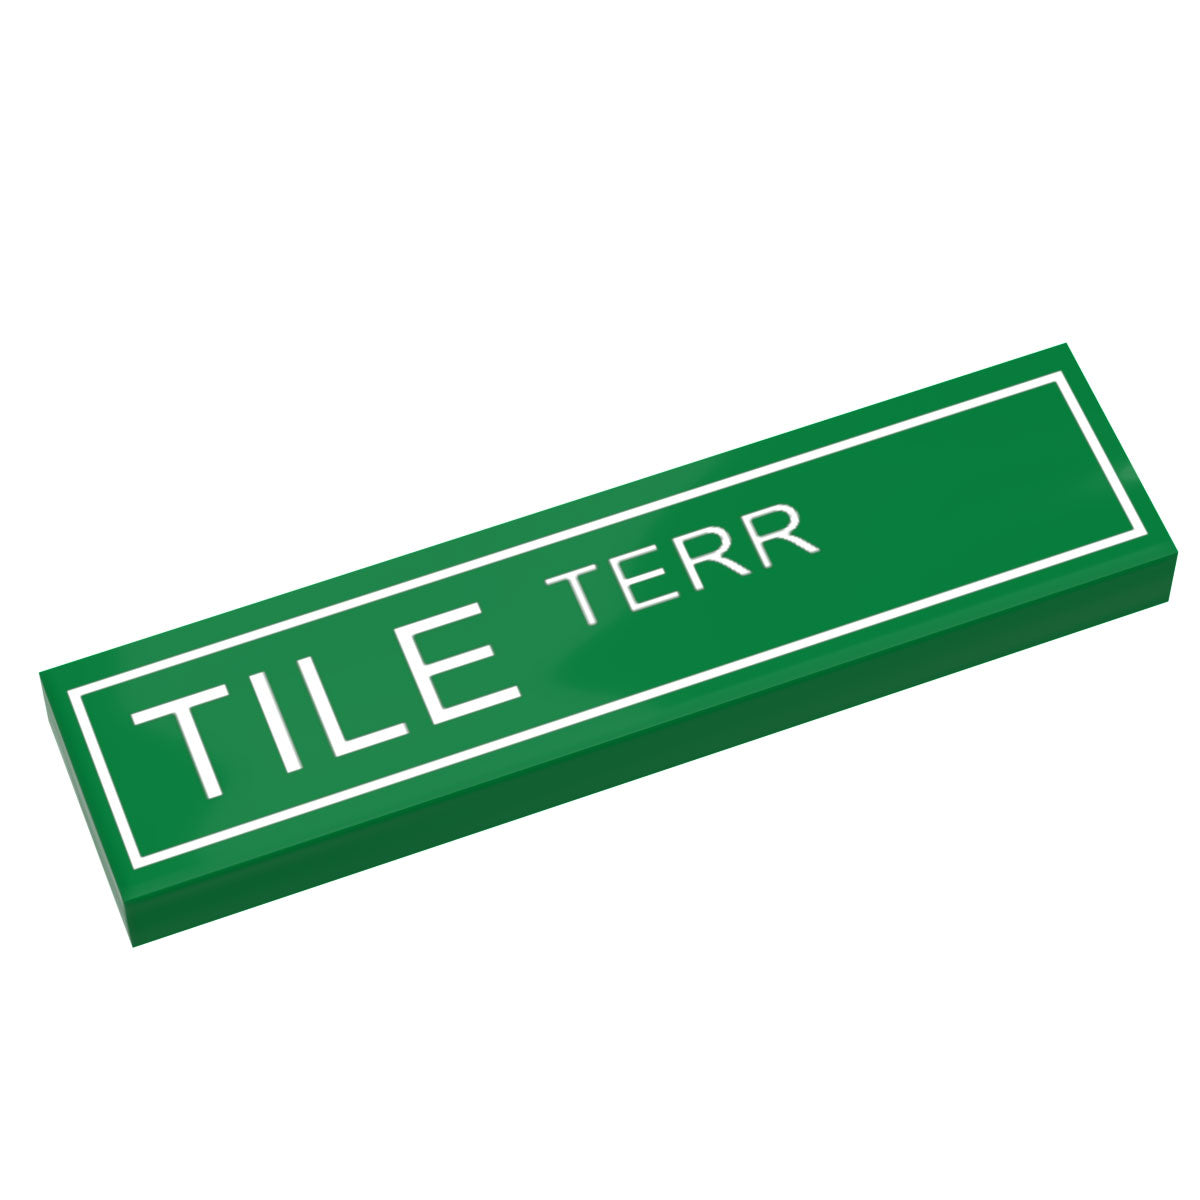 Tile Terrace Street Sign made with LEGO part (1x4 Tile) - B3 Customs